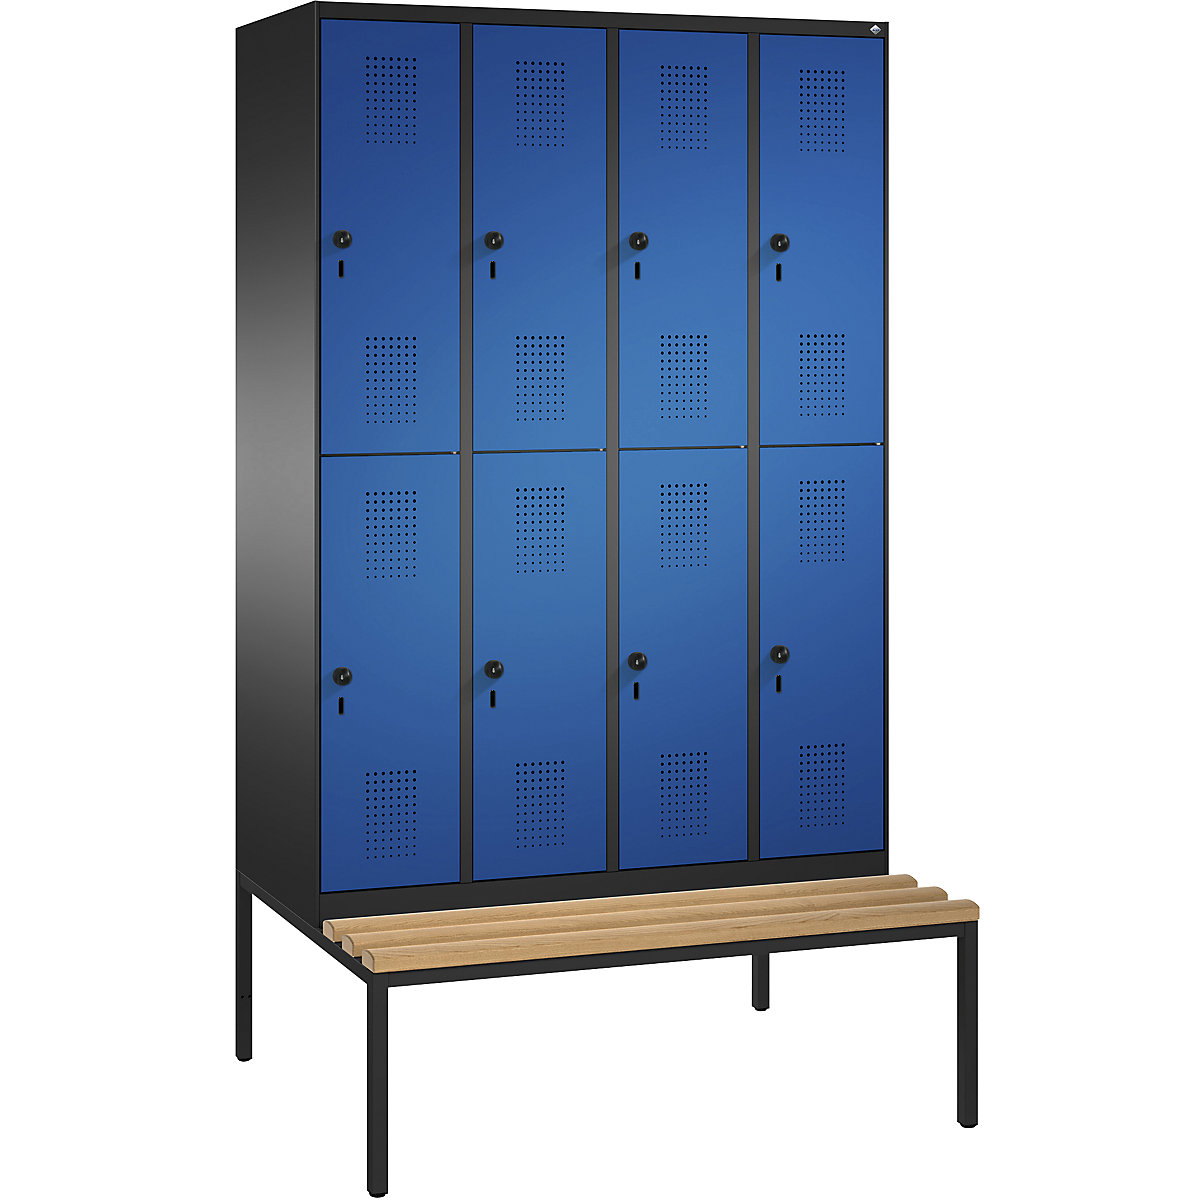 EVOLO cloakroom locker, double tier, with bench – C+P, 4 compartments, 2 shelf compartments each, compartment width 300 mm, black grey / gentian blue-8